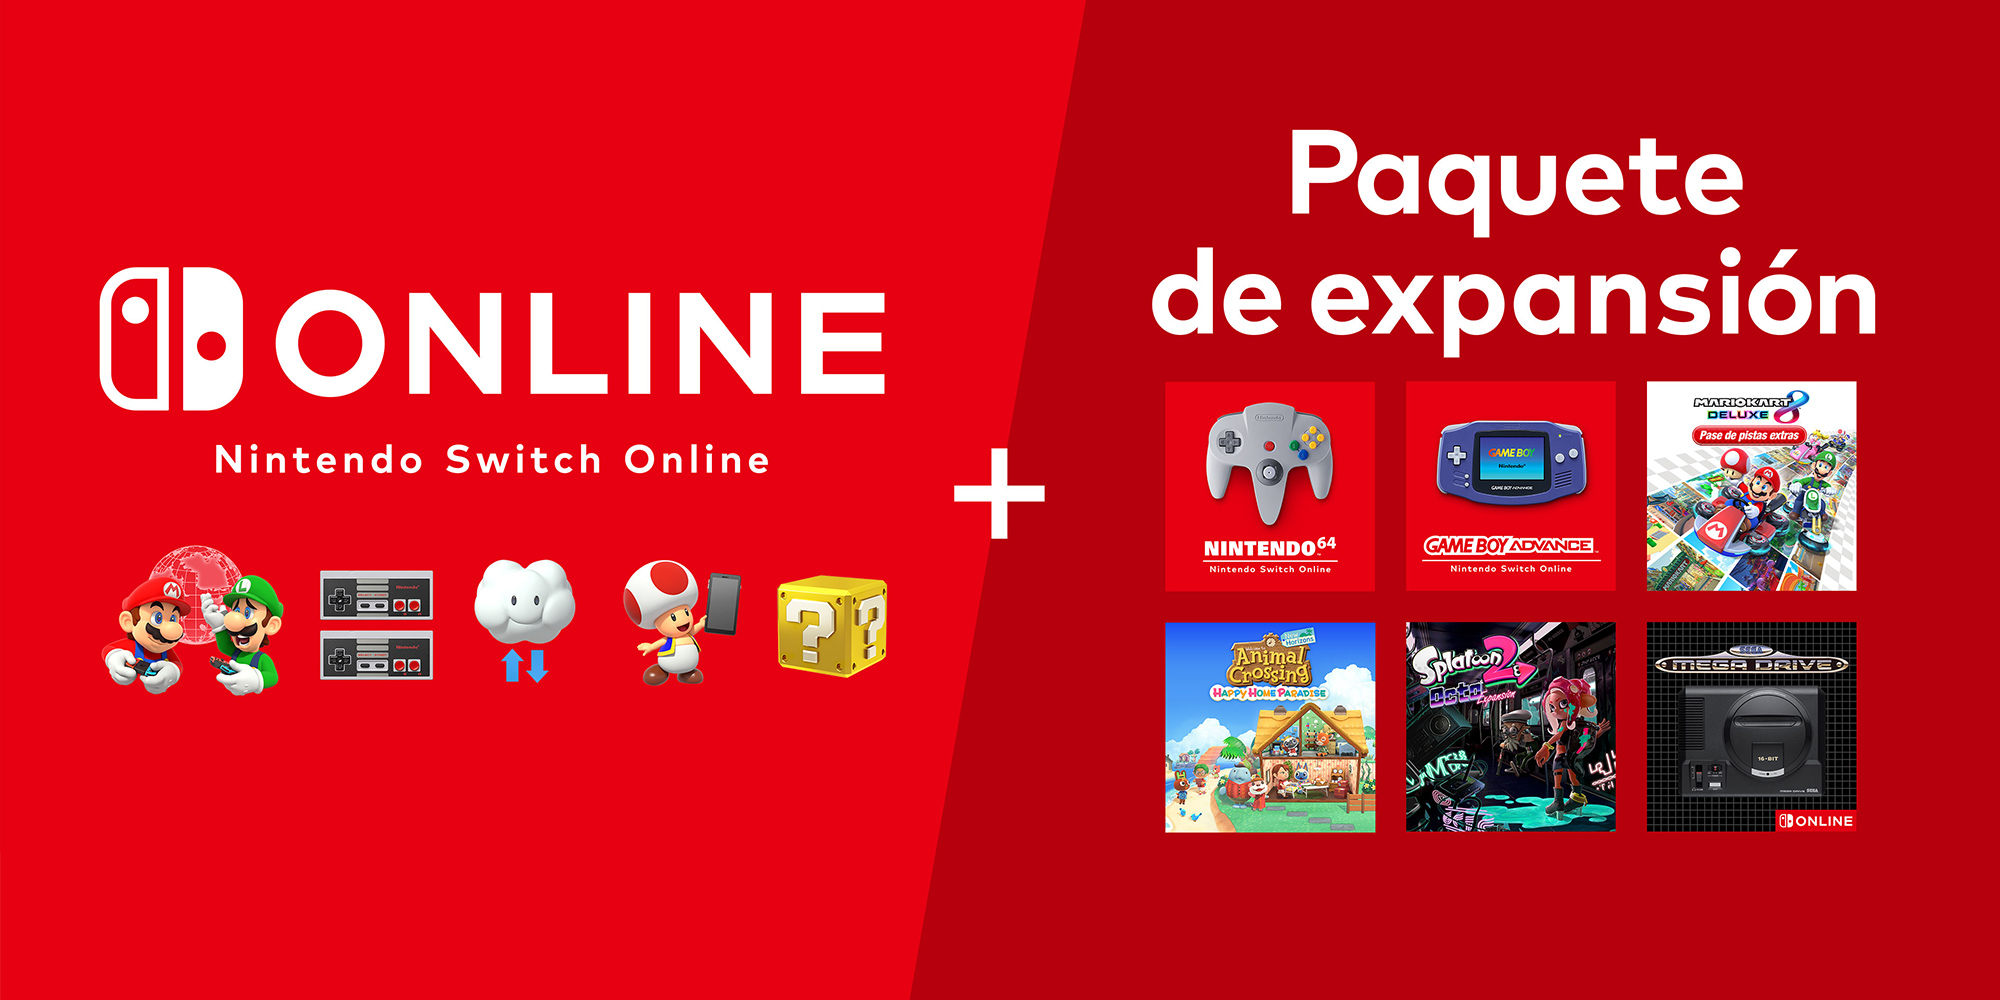 Valle canal Clasificar Nintendo Switch Online + Paquete de expansión | Nintendo Switch Online |  Nintendo